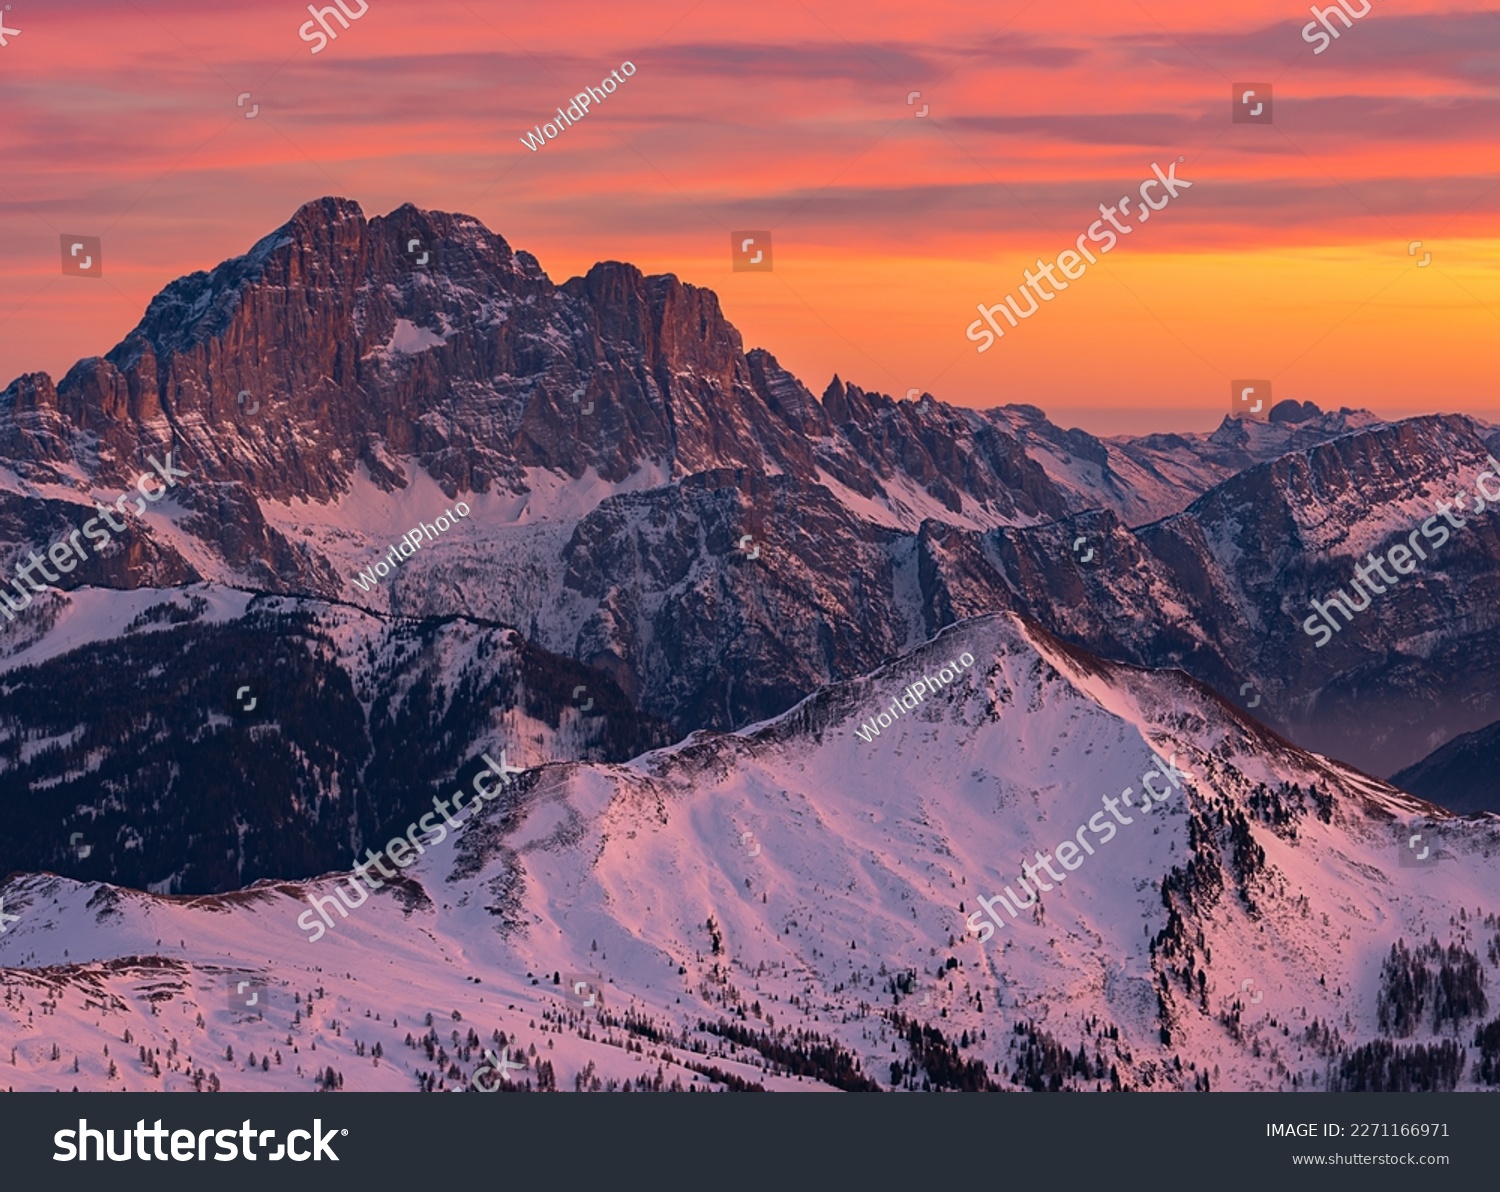 Spectacular Views of the Mountain Peaks of the Dolomites Alps #2271166971